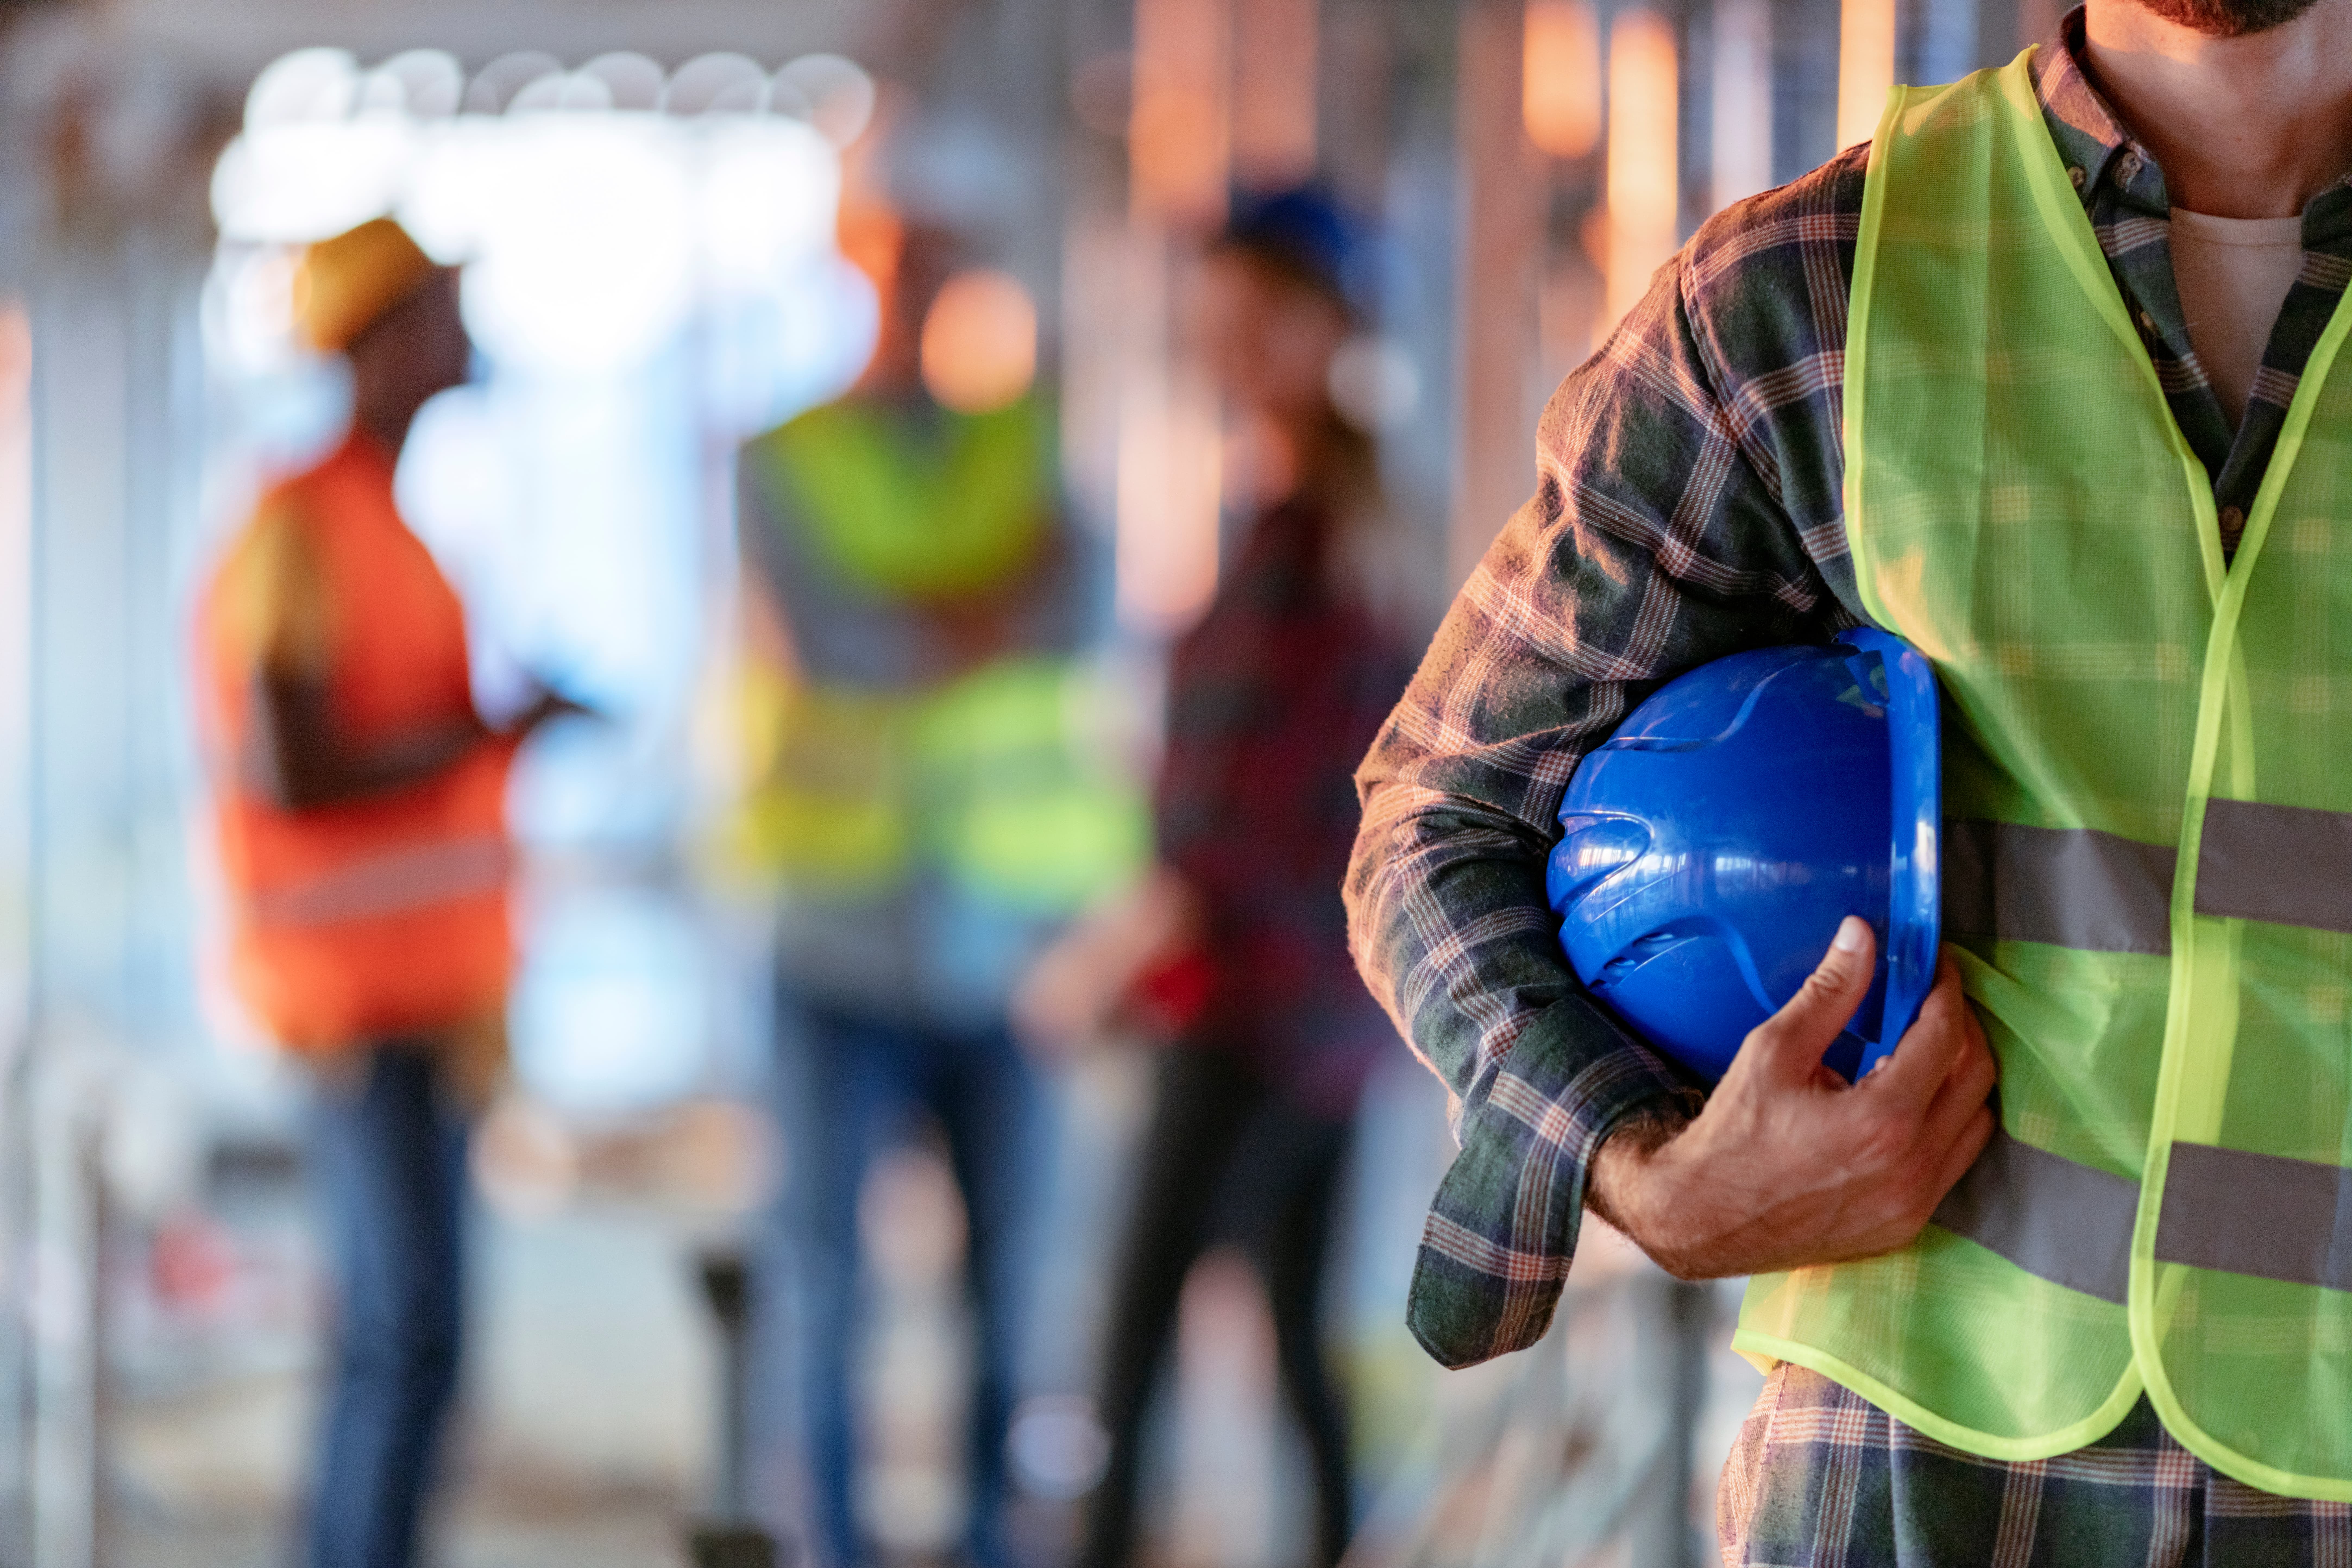 Workers’ Comp Claims Rise With a Drop in Worker Safety